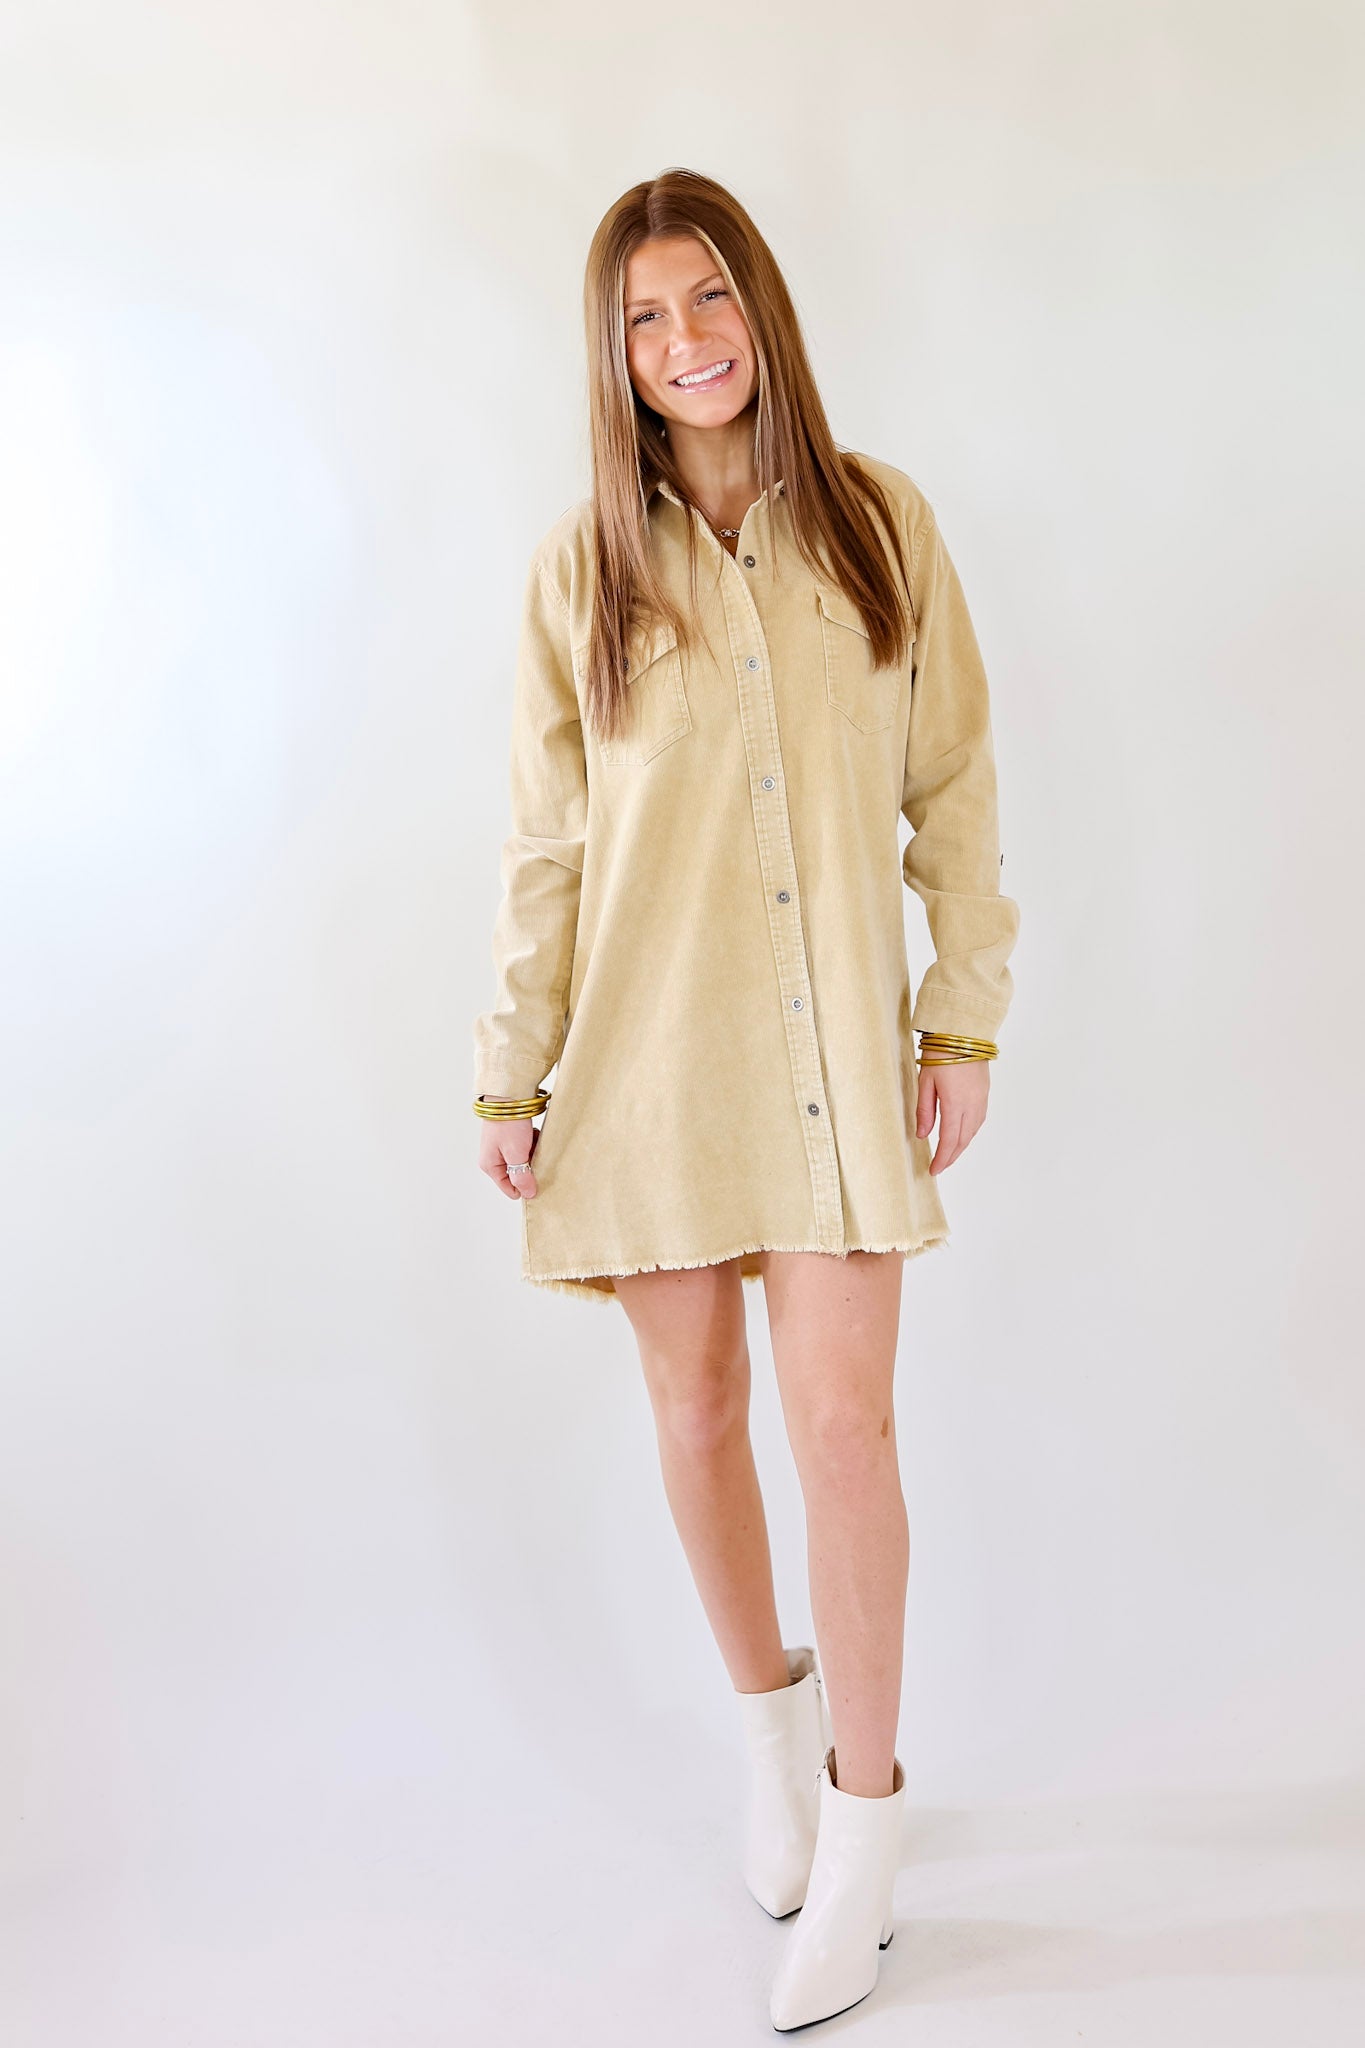 Patio Date Button Up Long Sleeve Corduroy Dress in Tan - Giddy Up Glamour Boutique